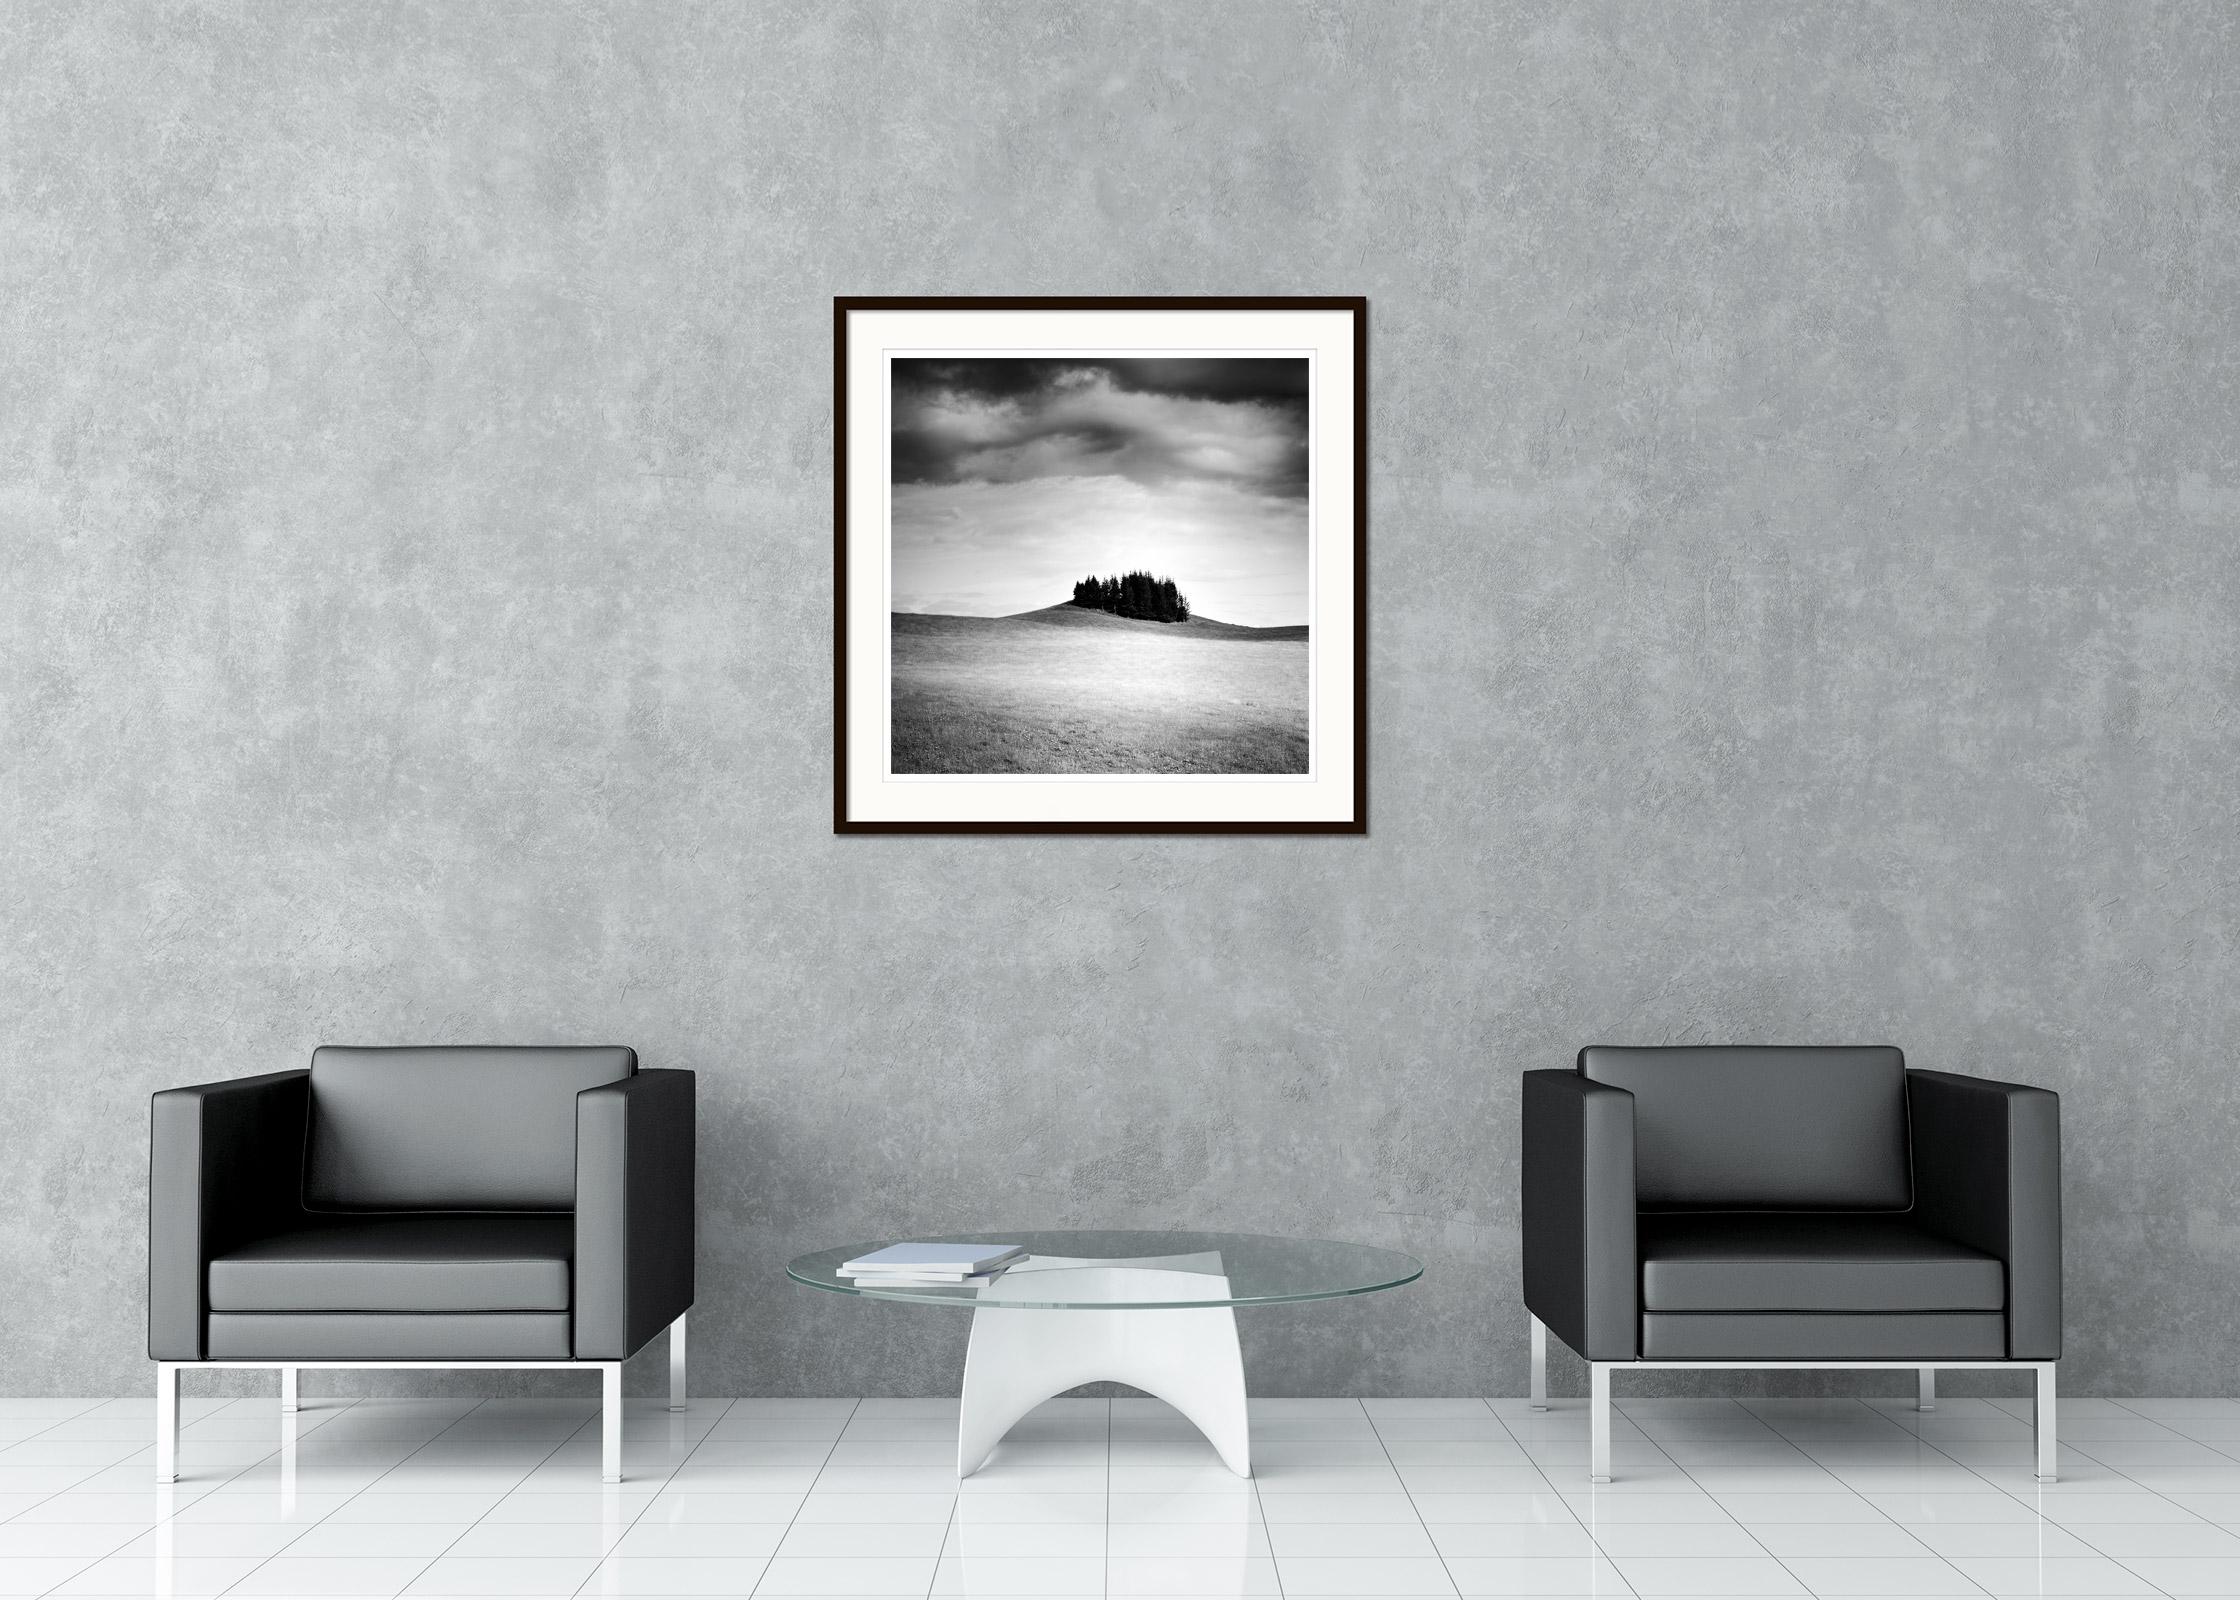 Little Green Island, Iceland black and white landscape, photography, fine art  - Gray Landscape Photograph by Gerald Berghammer, Ina Forstinger